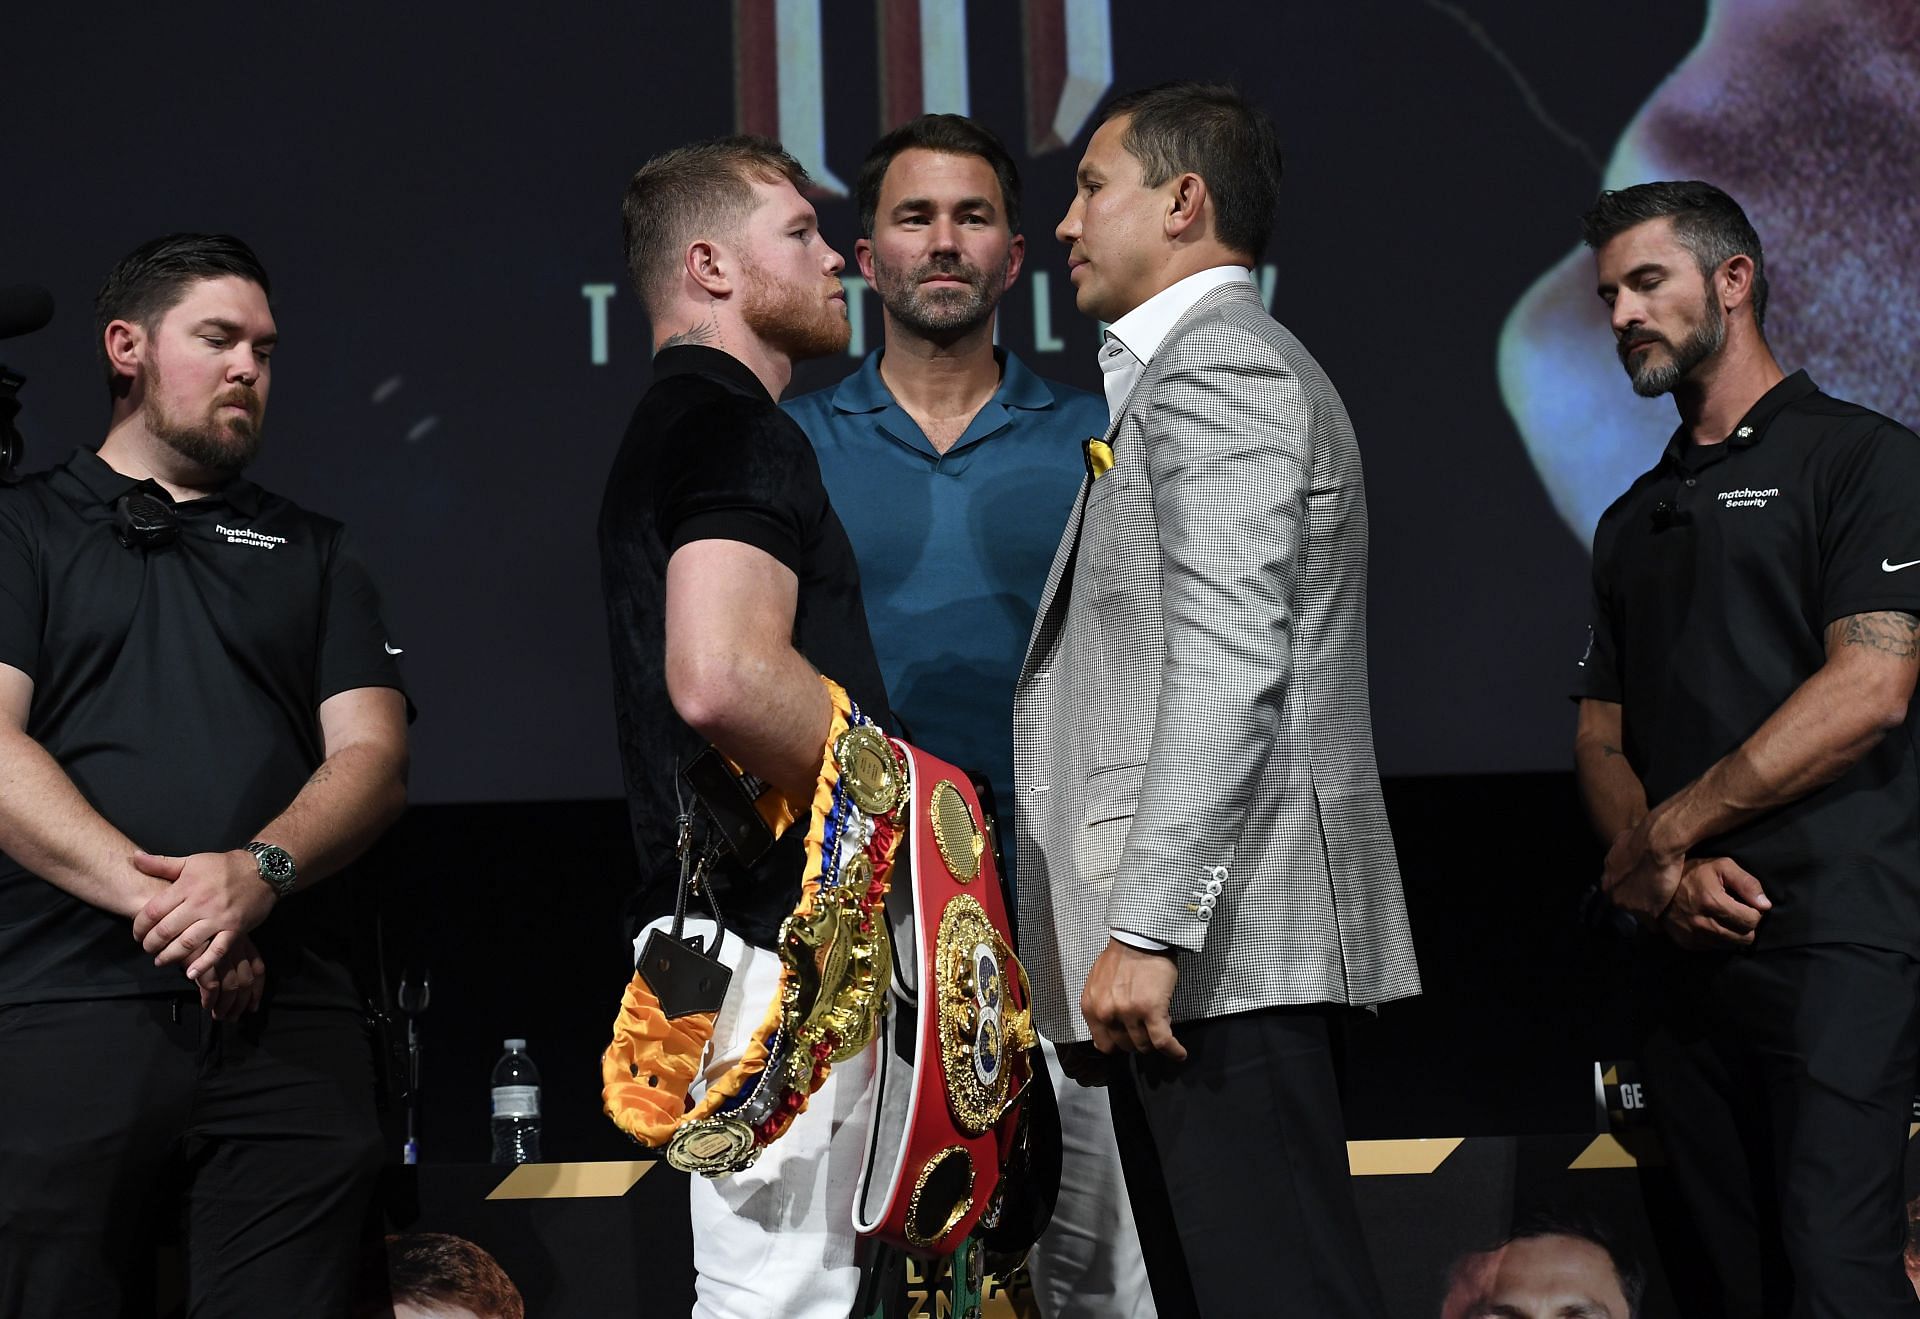 Canelo Alvarez and Gennadiy Golovkin face off during the press conference